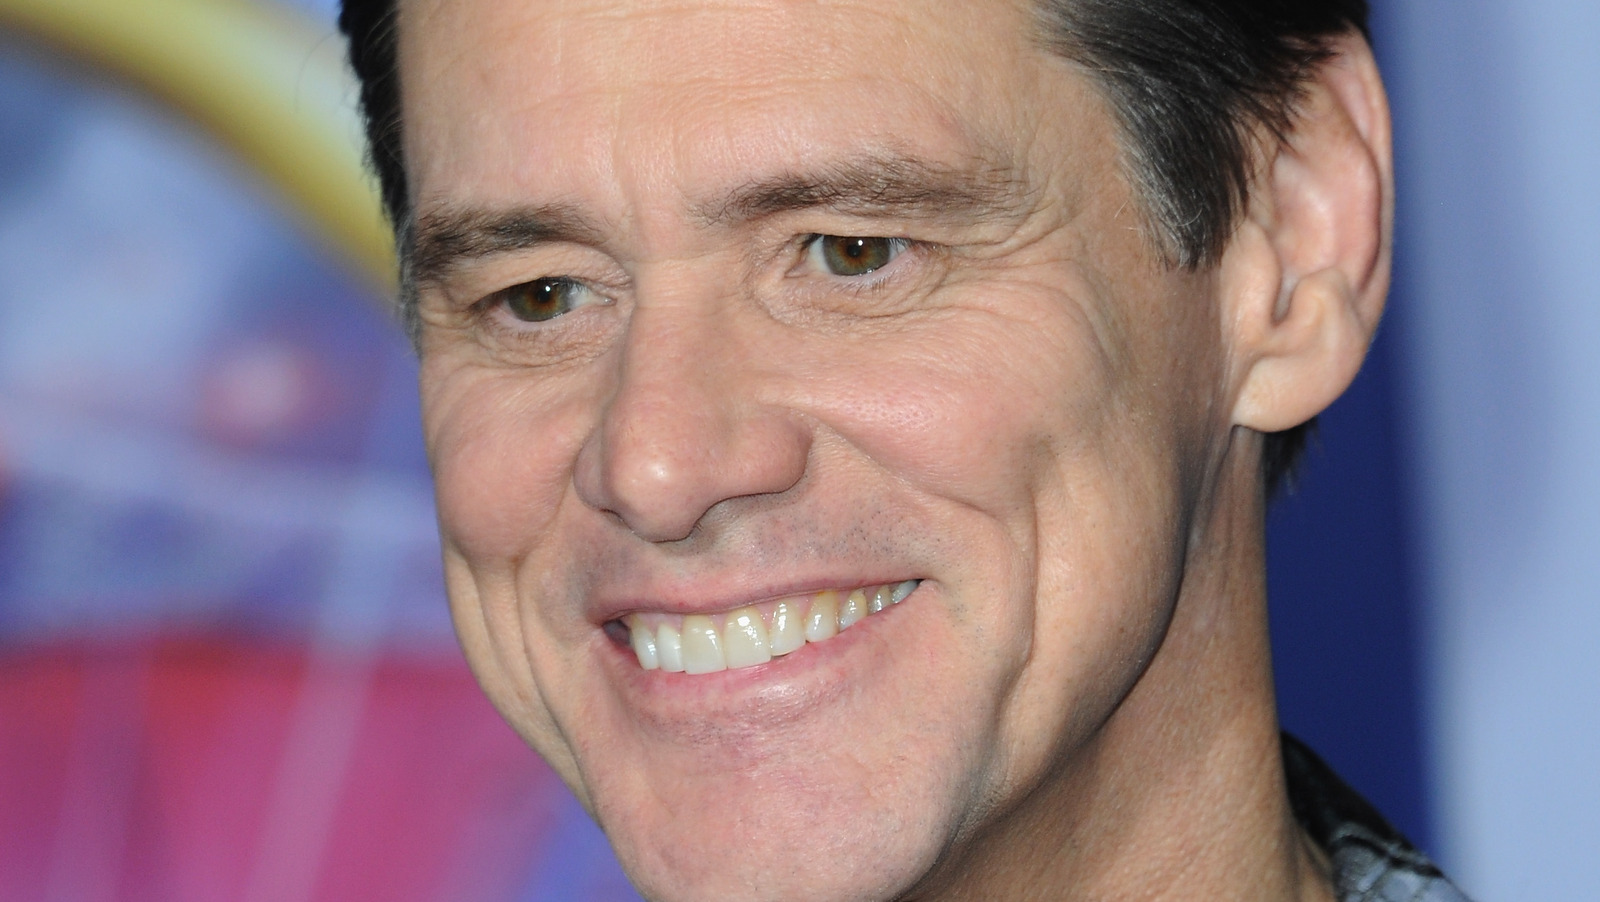 The Real Reason Jim Carrey Dyed His Hair Blue: A Look at His Personal Life - wide 8